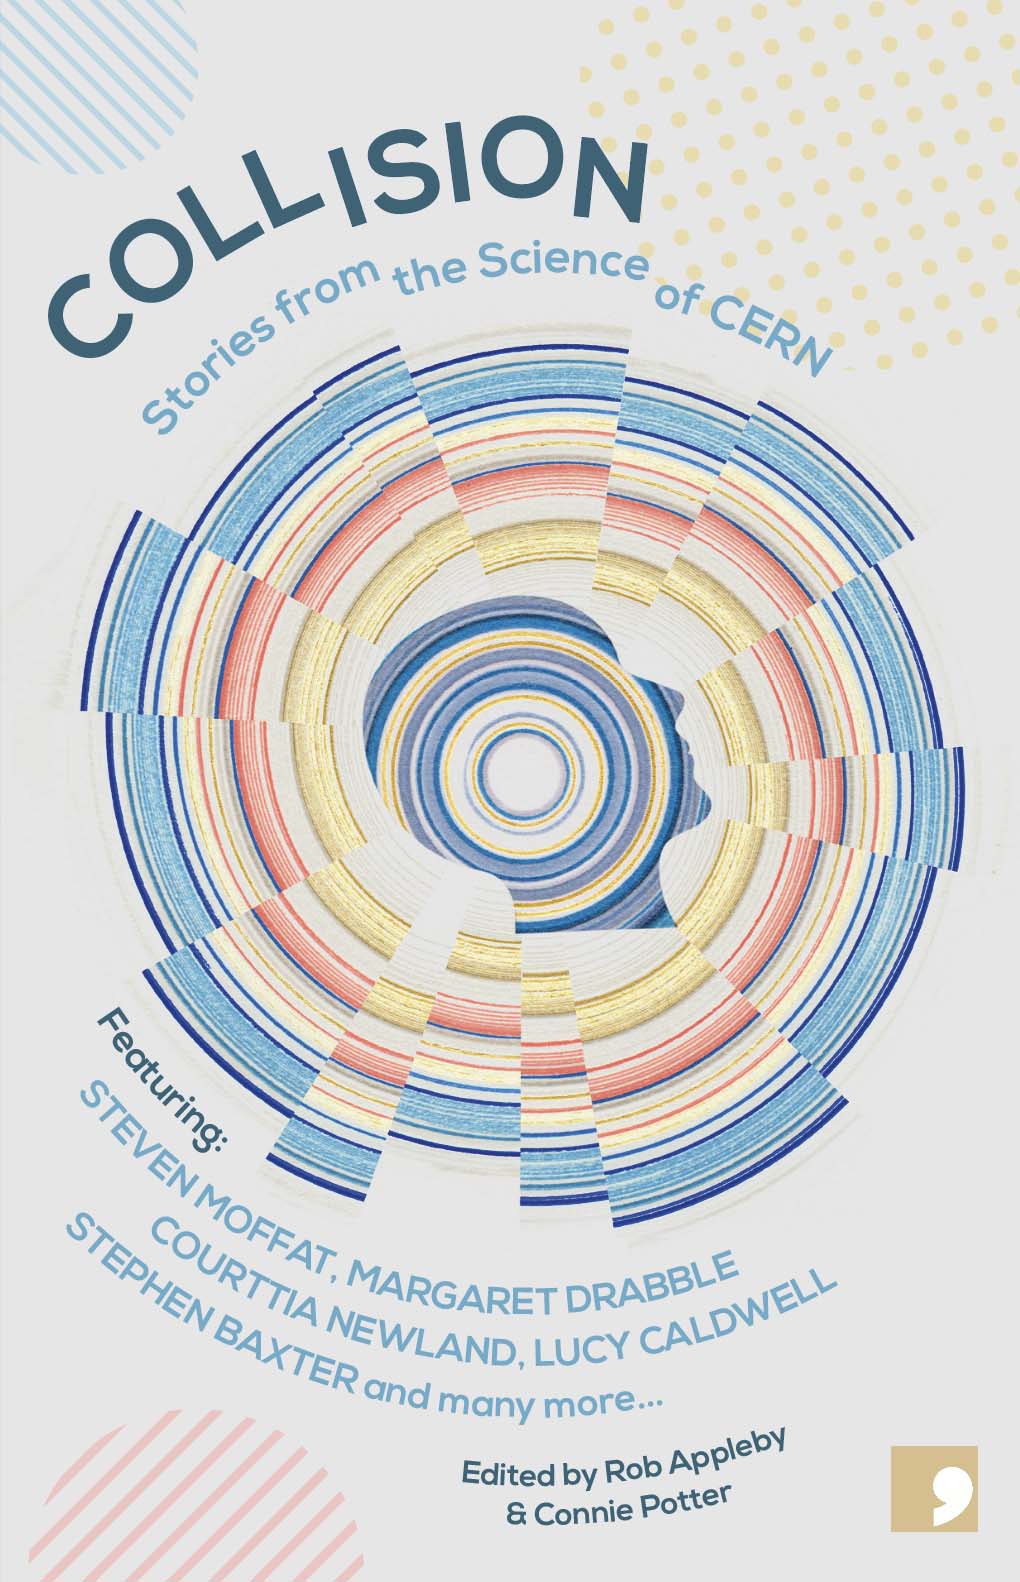 “Collision: Stories From the Science of CERN” edited by Rob Appleby and Connie Potter.